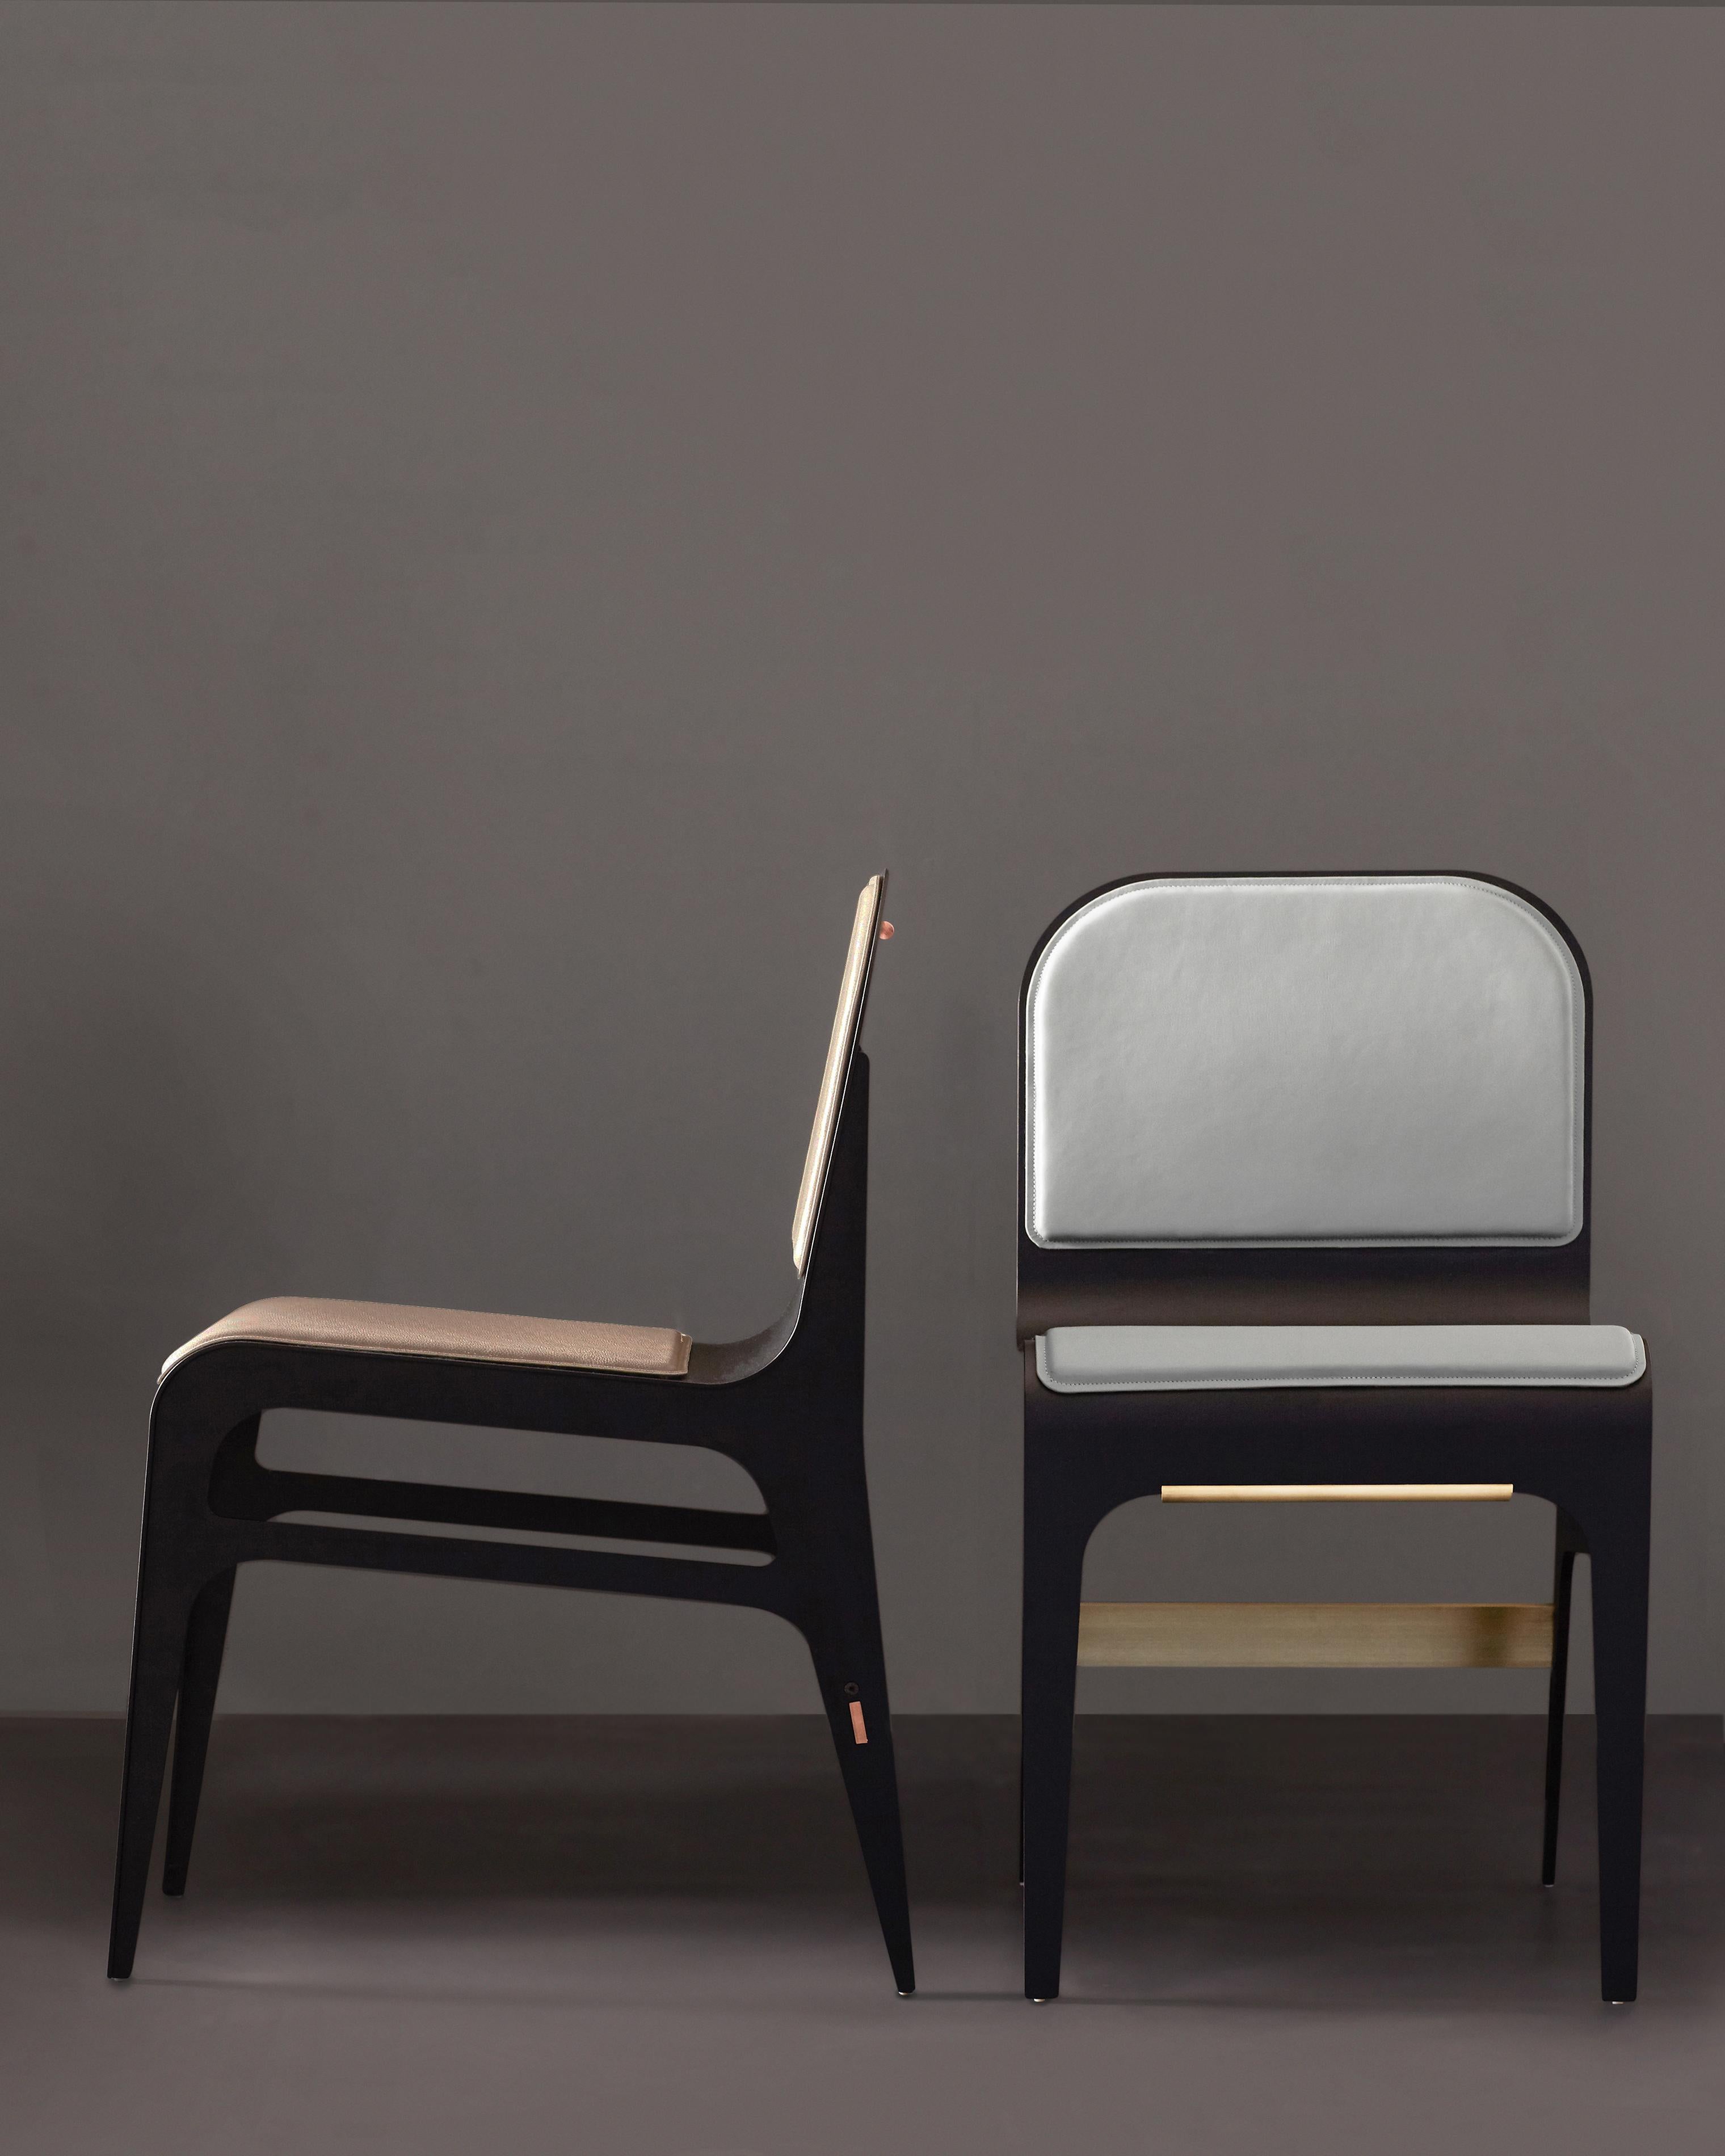 Canadian Bardot Dining Chair with Leather Seat and Satin Nickel Hardware by Gabriel Scott